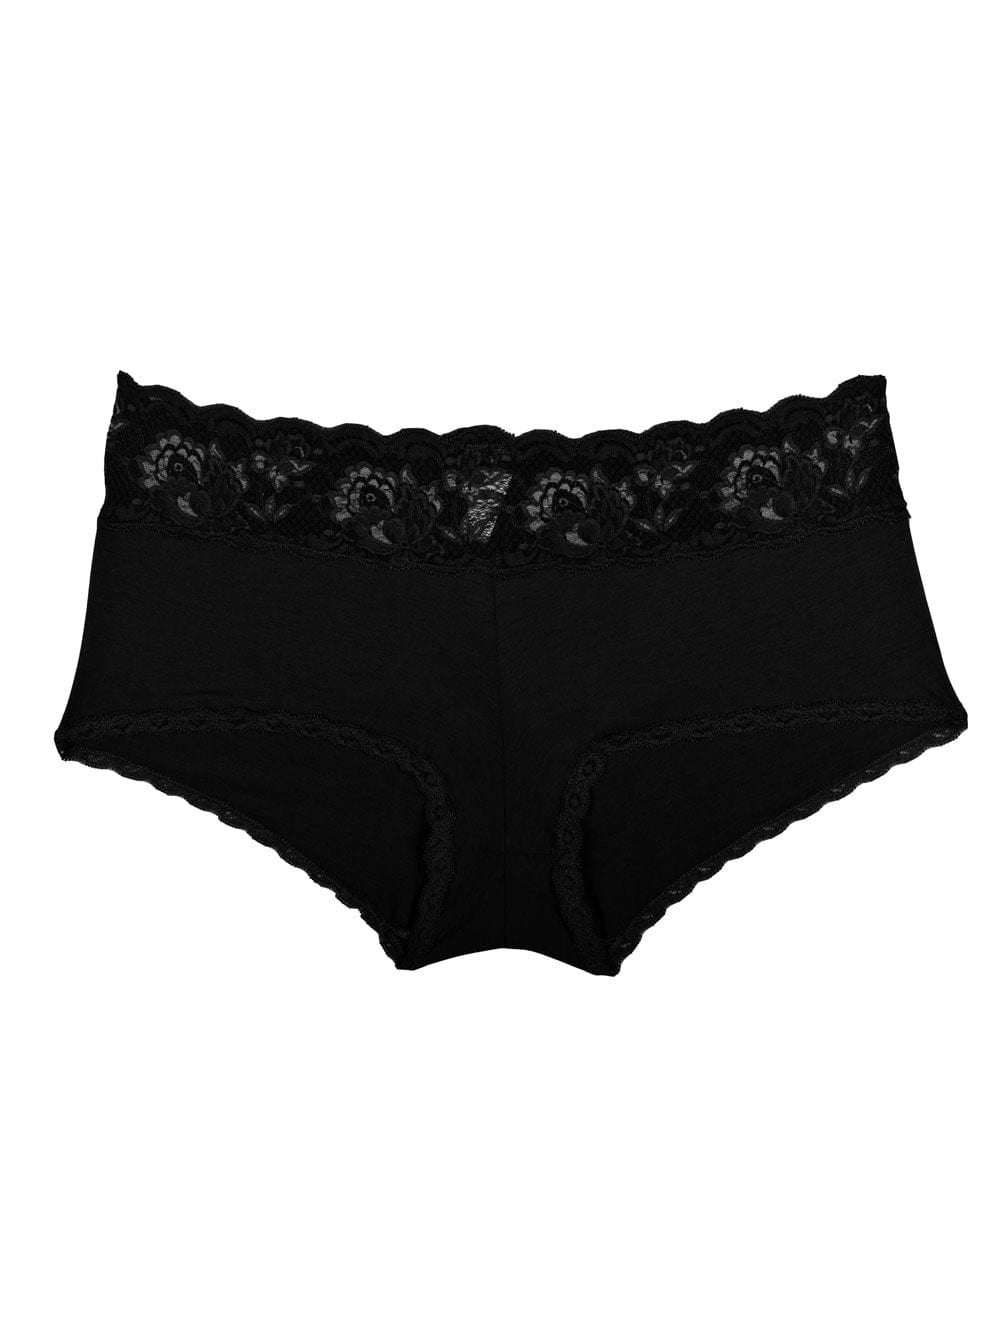 Cheeky Panties for Women Hipster Club Seamless Strappy Criss-Cross